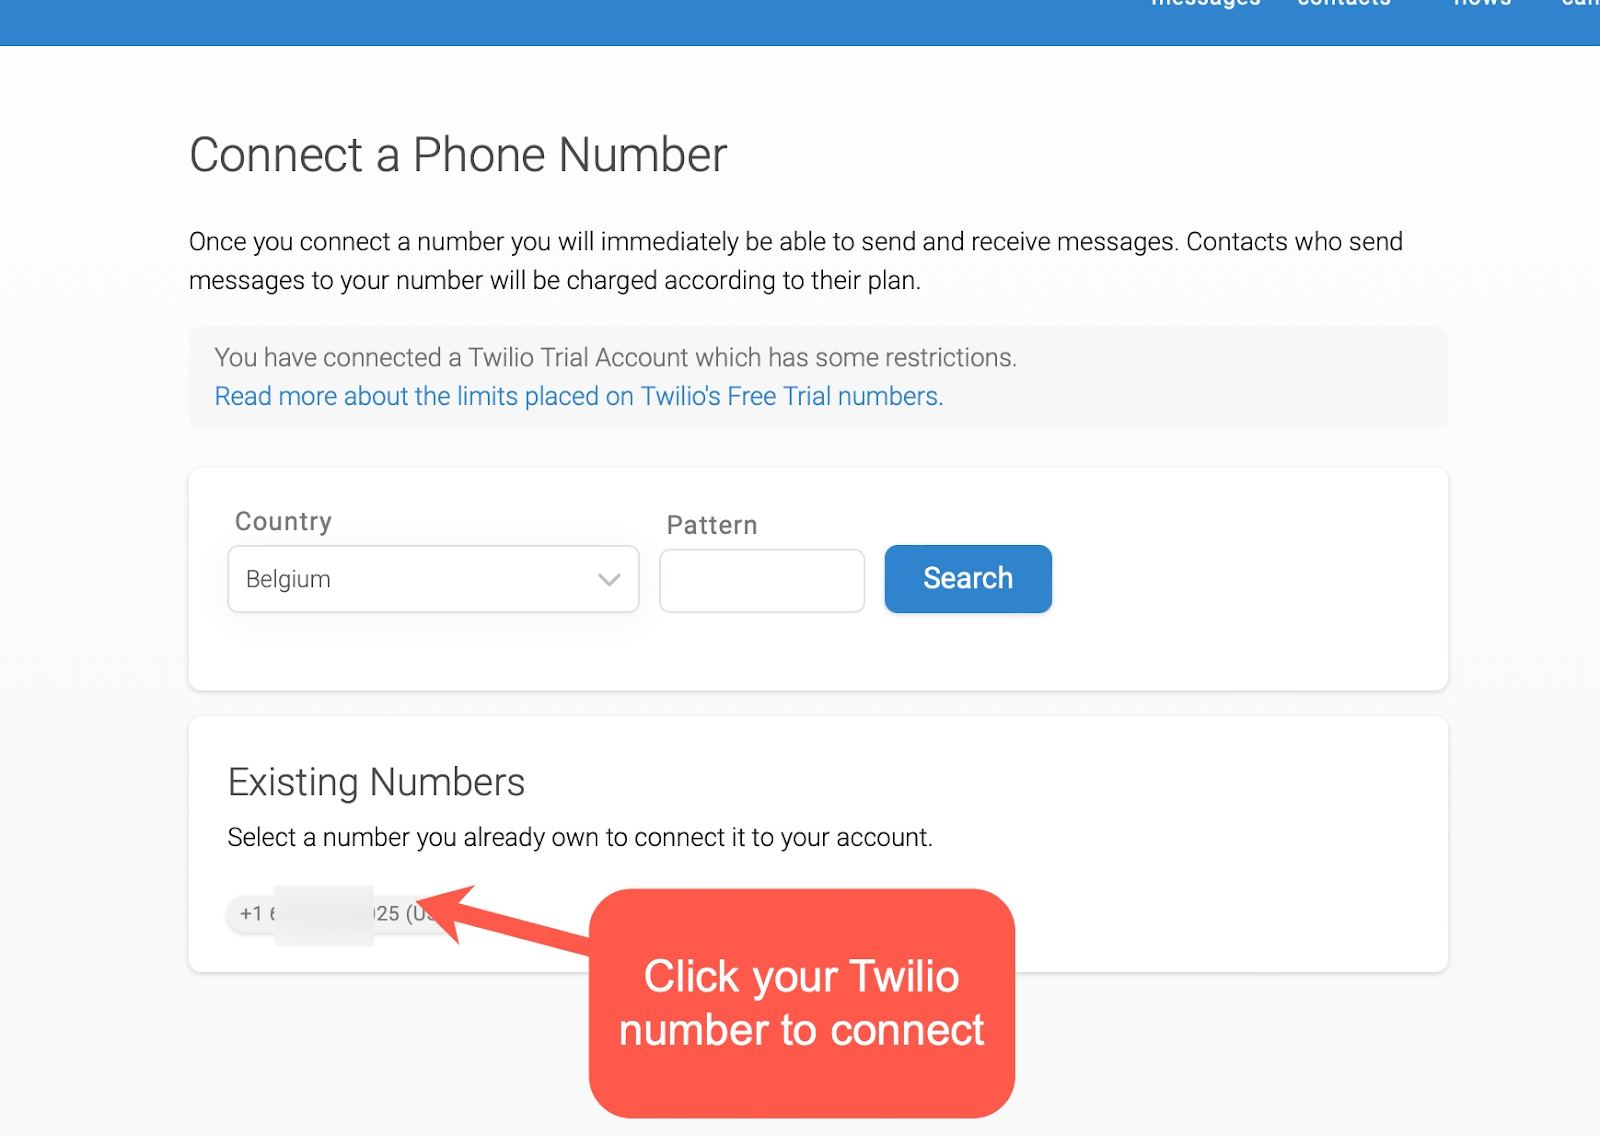 Choosing from existing phone numbers in TextIt